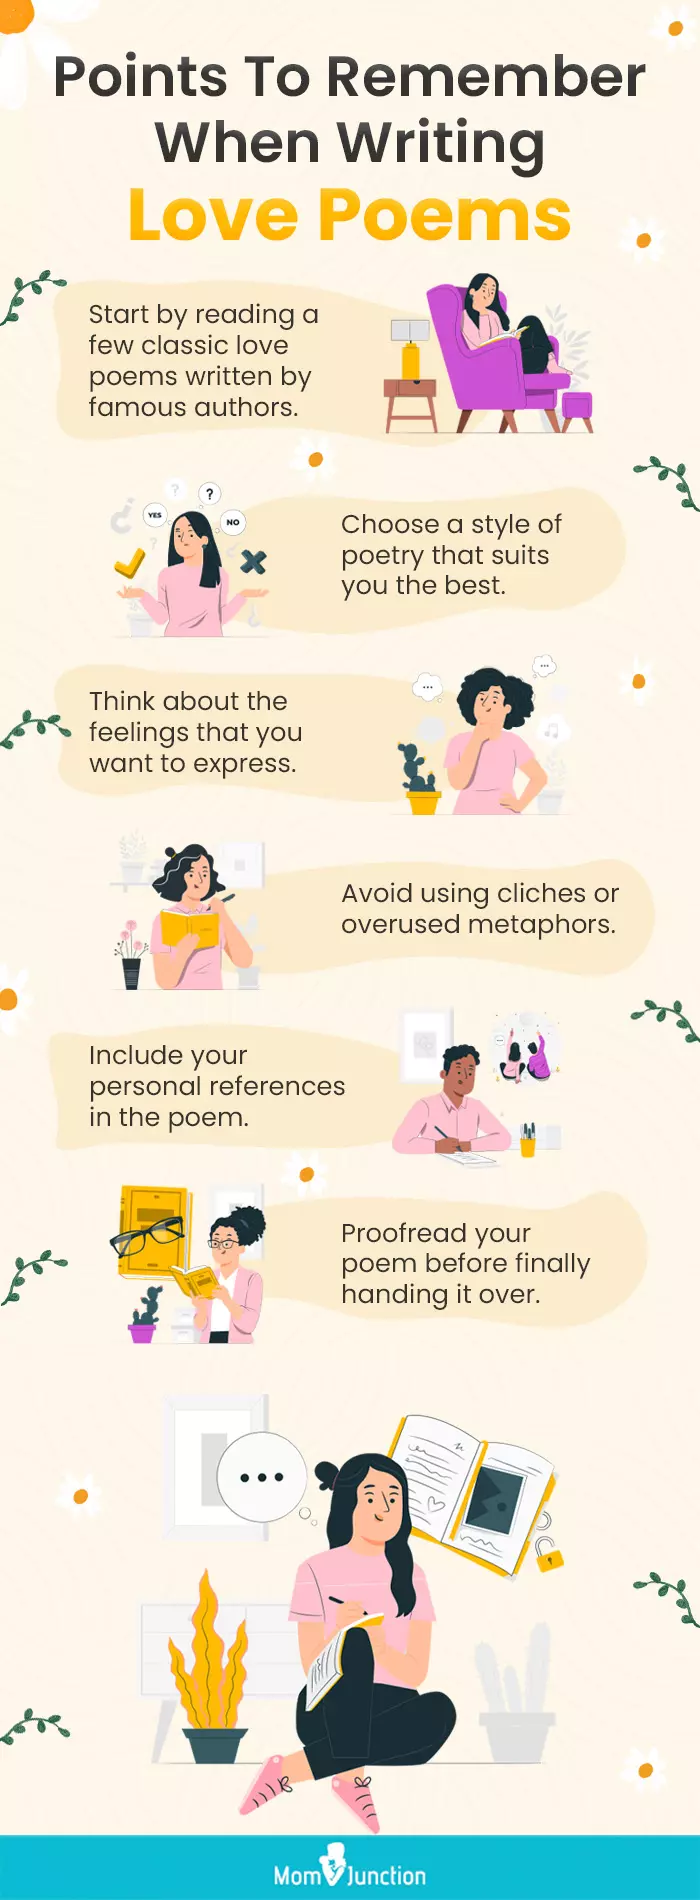 points to remember when writing love poems (infographic)